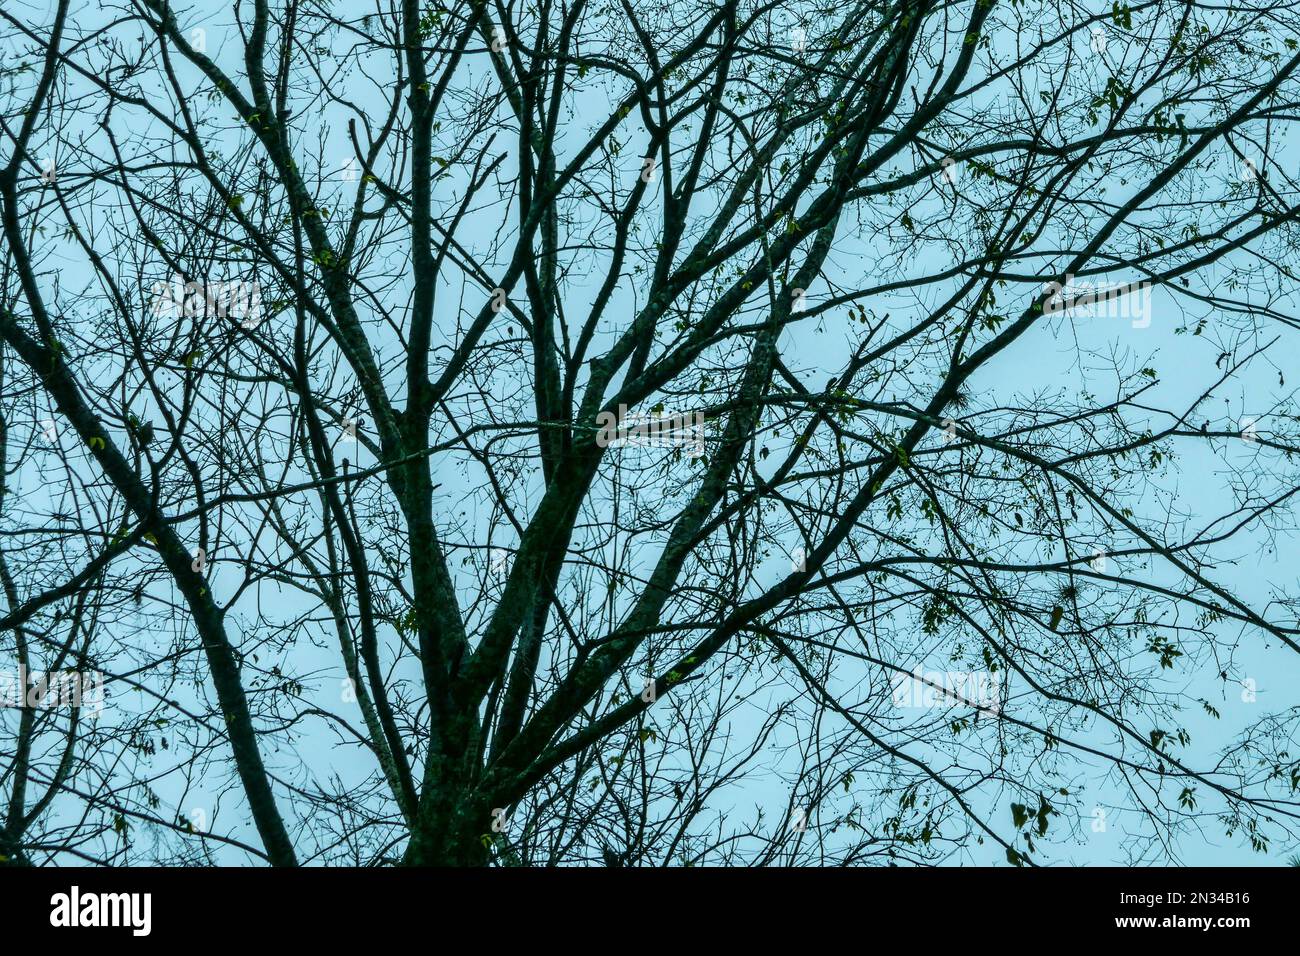 Bare branches of winter trees. Stock Photo